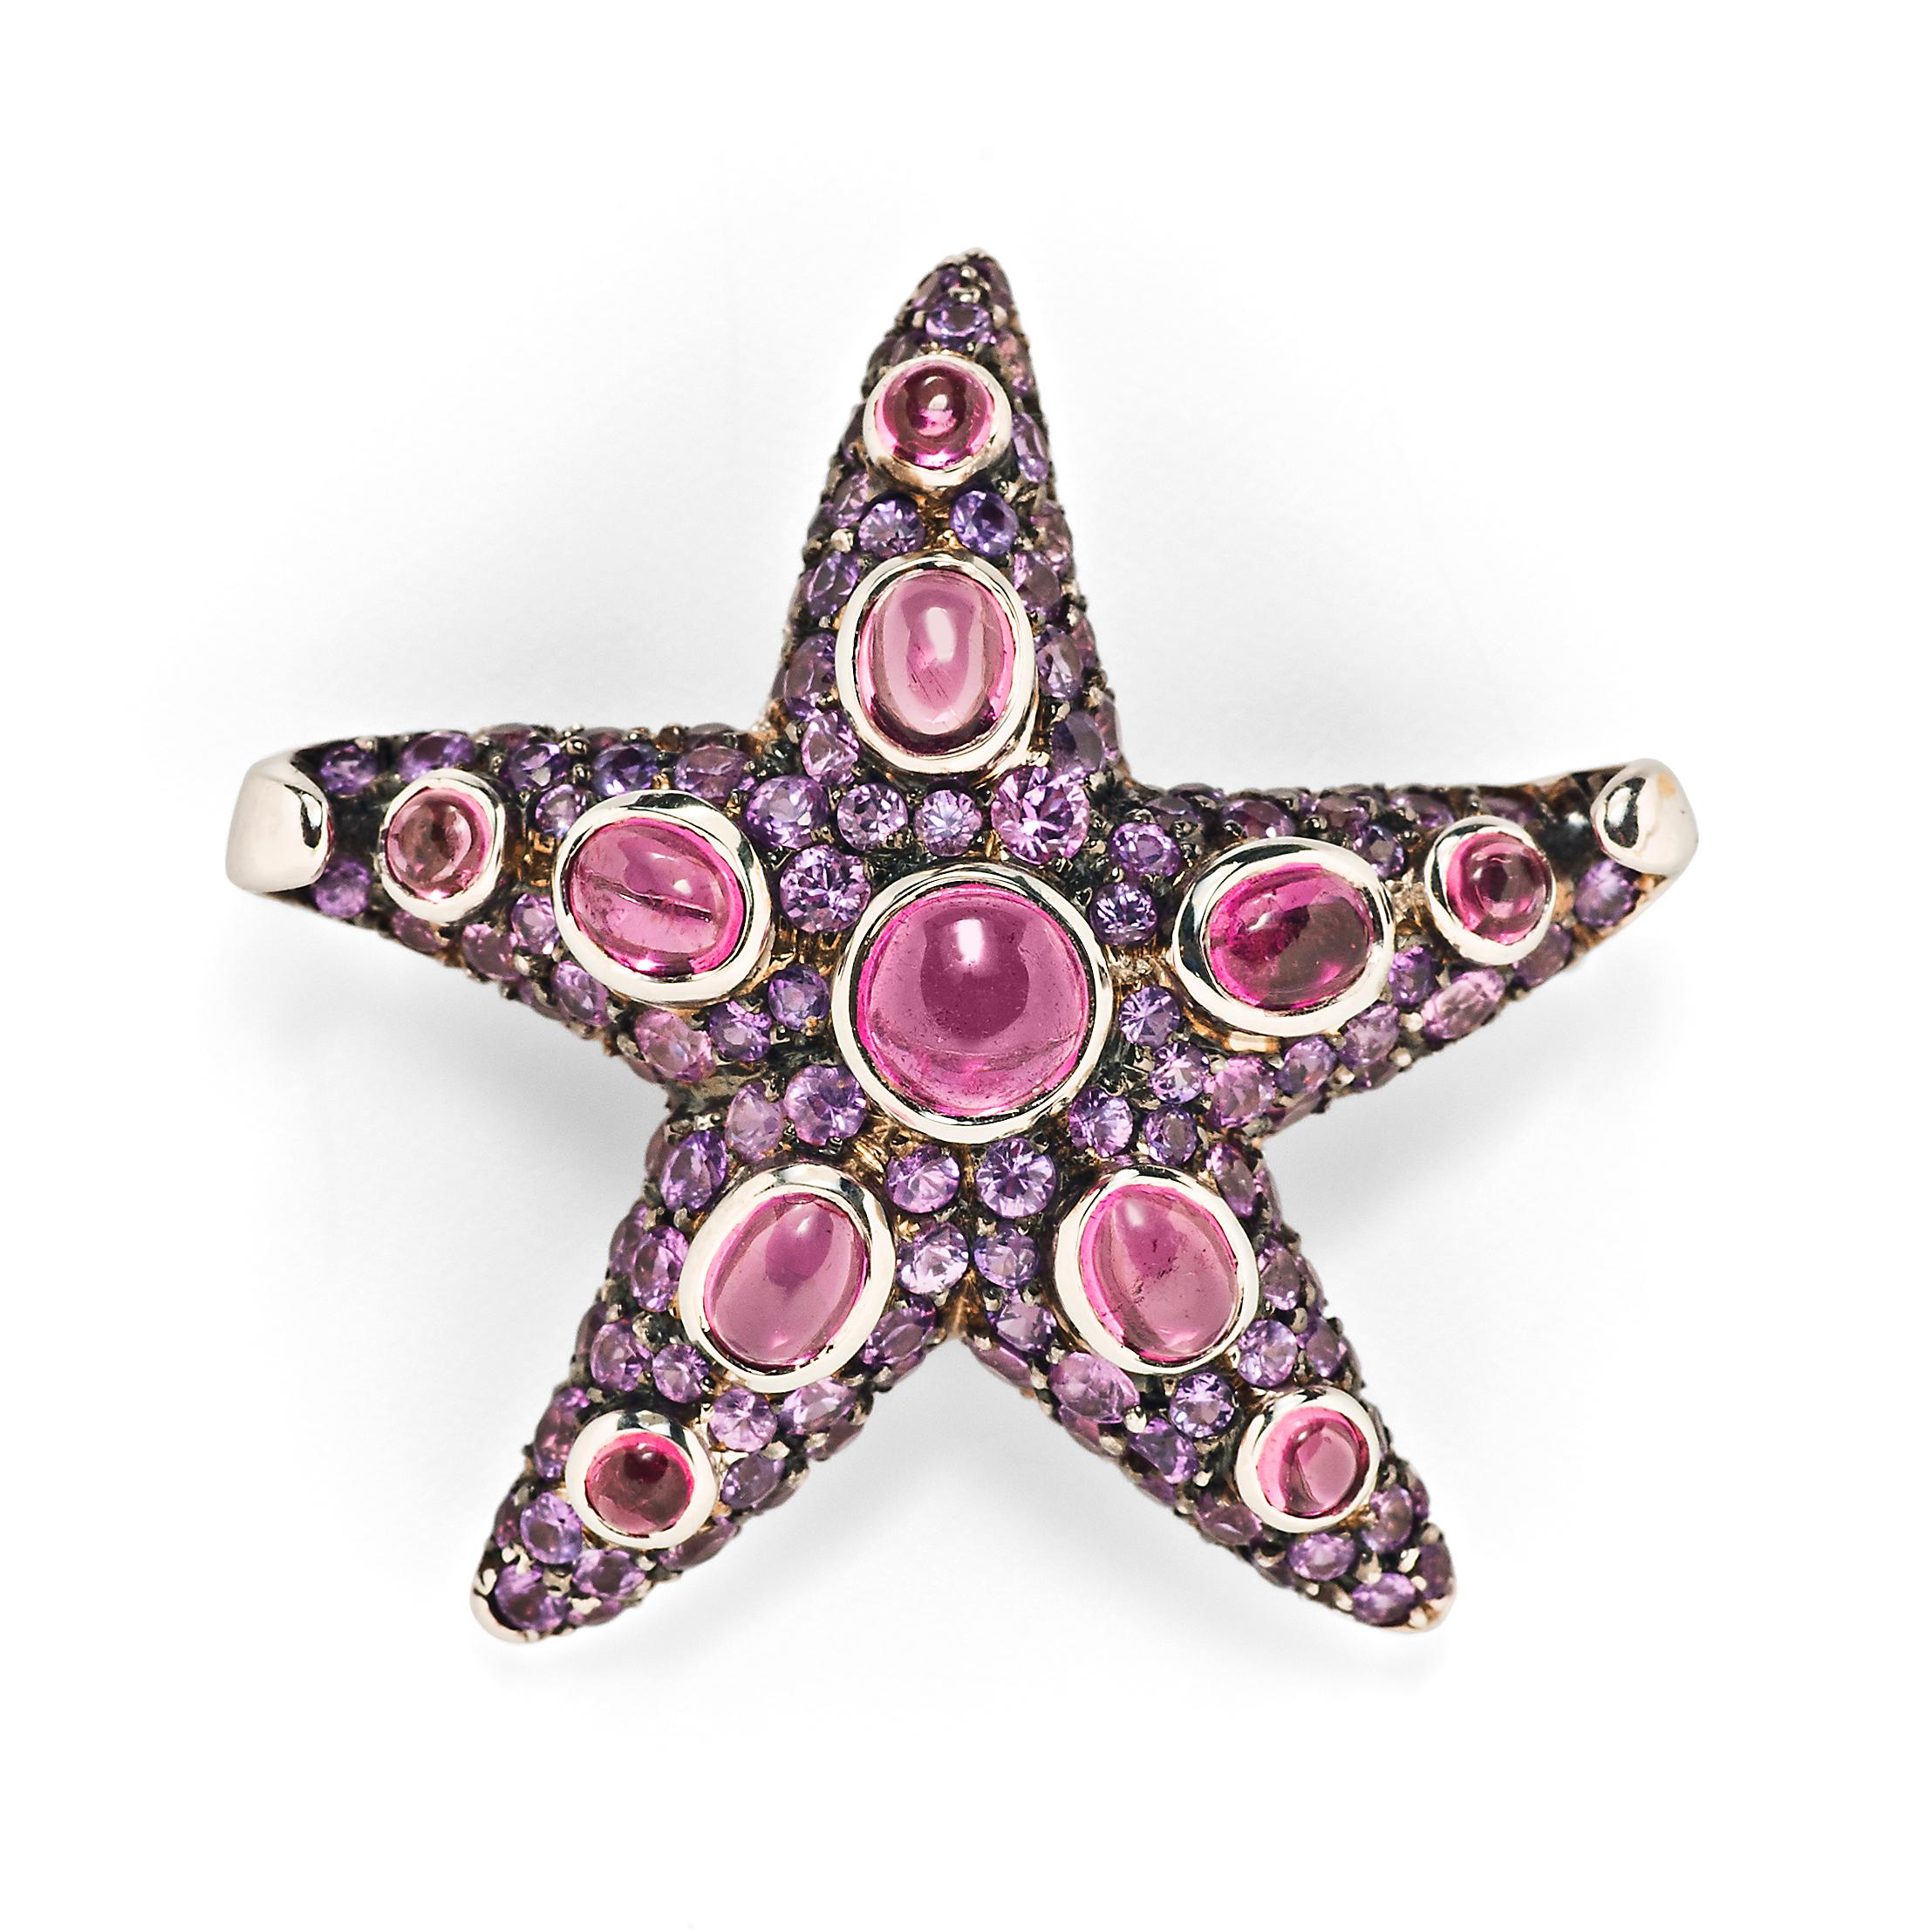 Contemporary Pair of René Boivin “Etoile de Mer” Sapphire and Tourmaline Brooches For Sale